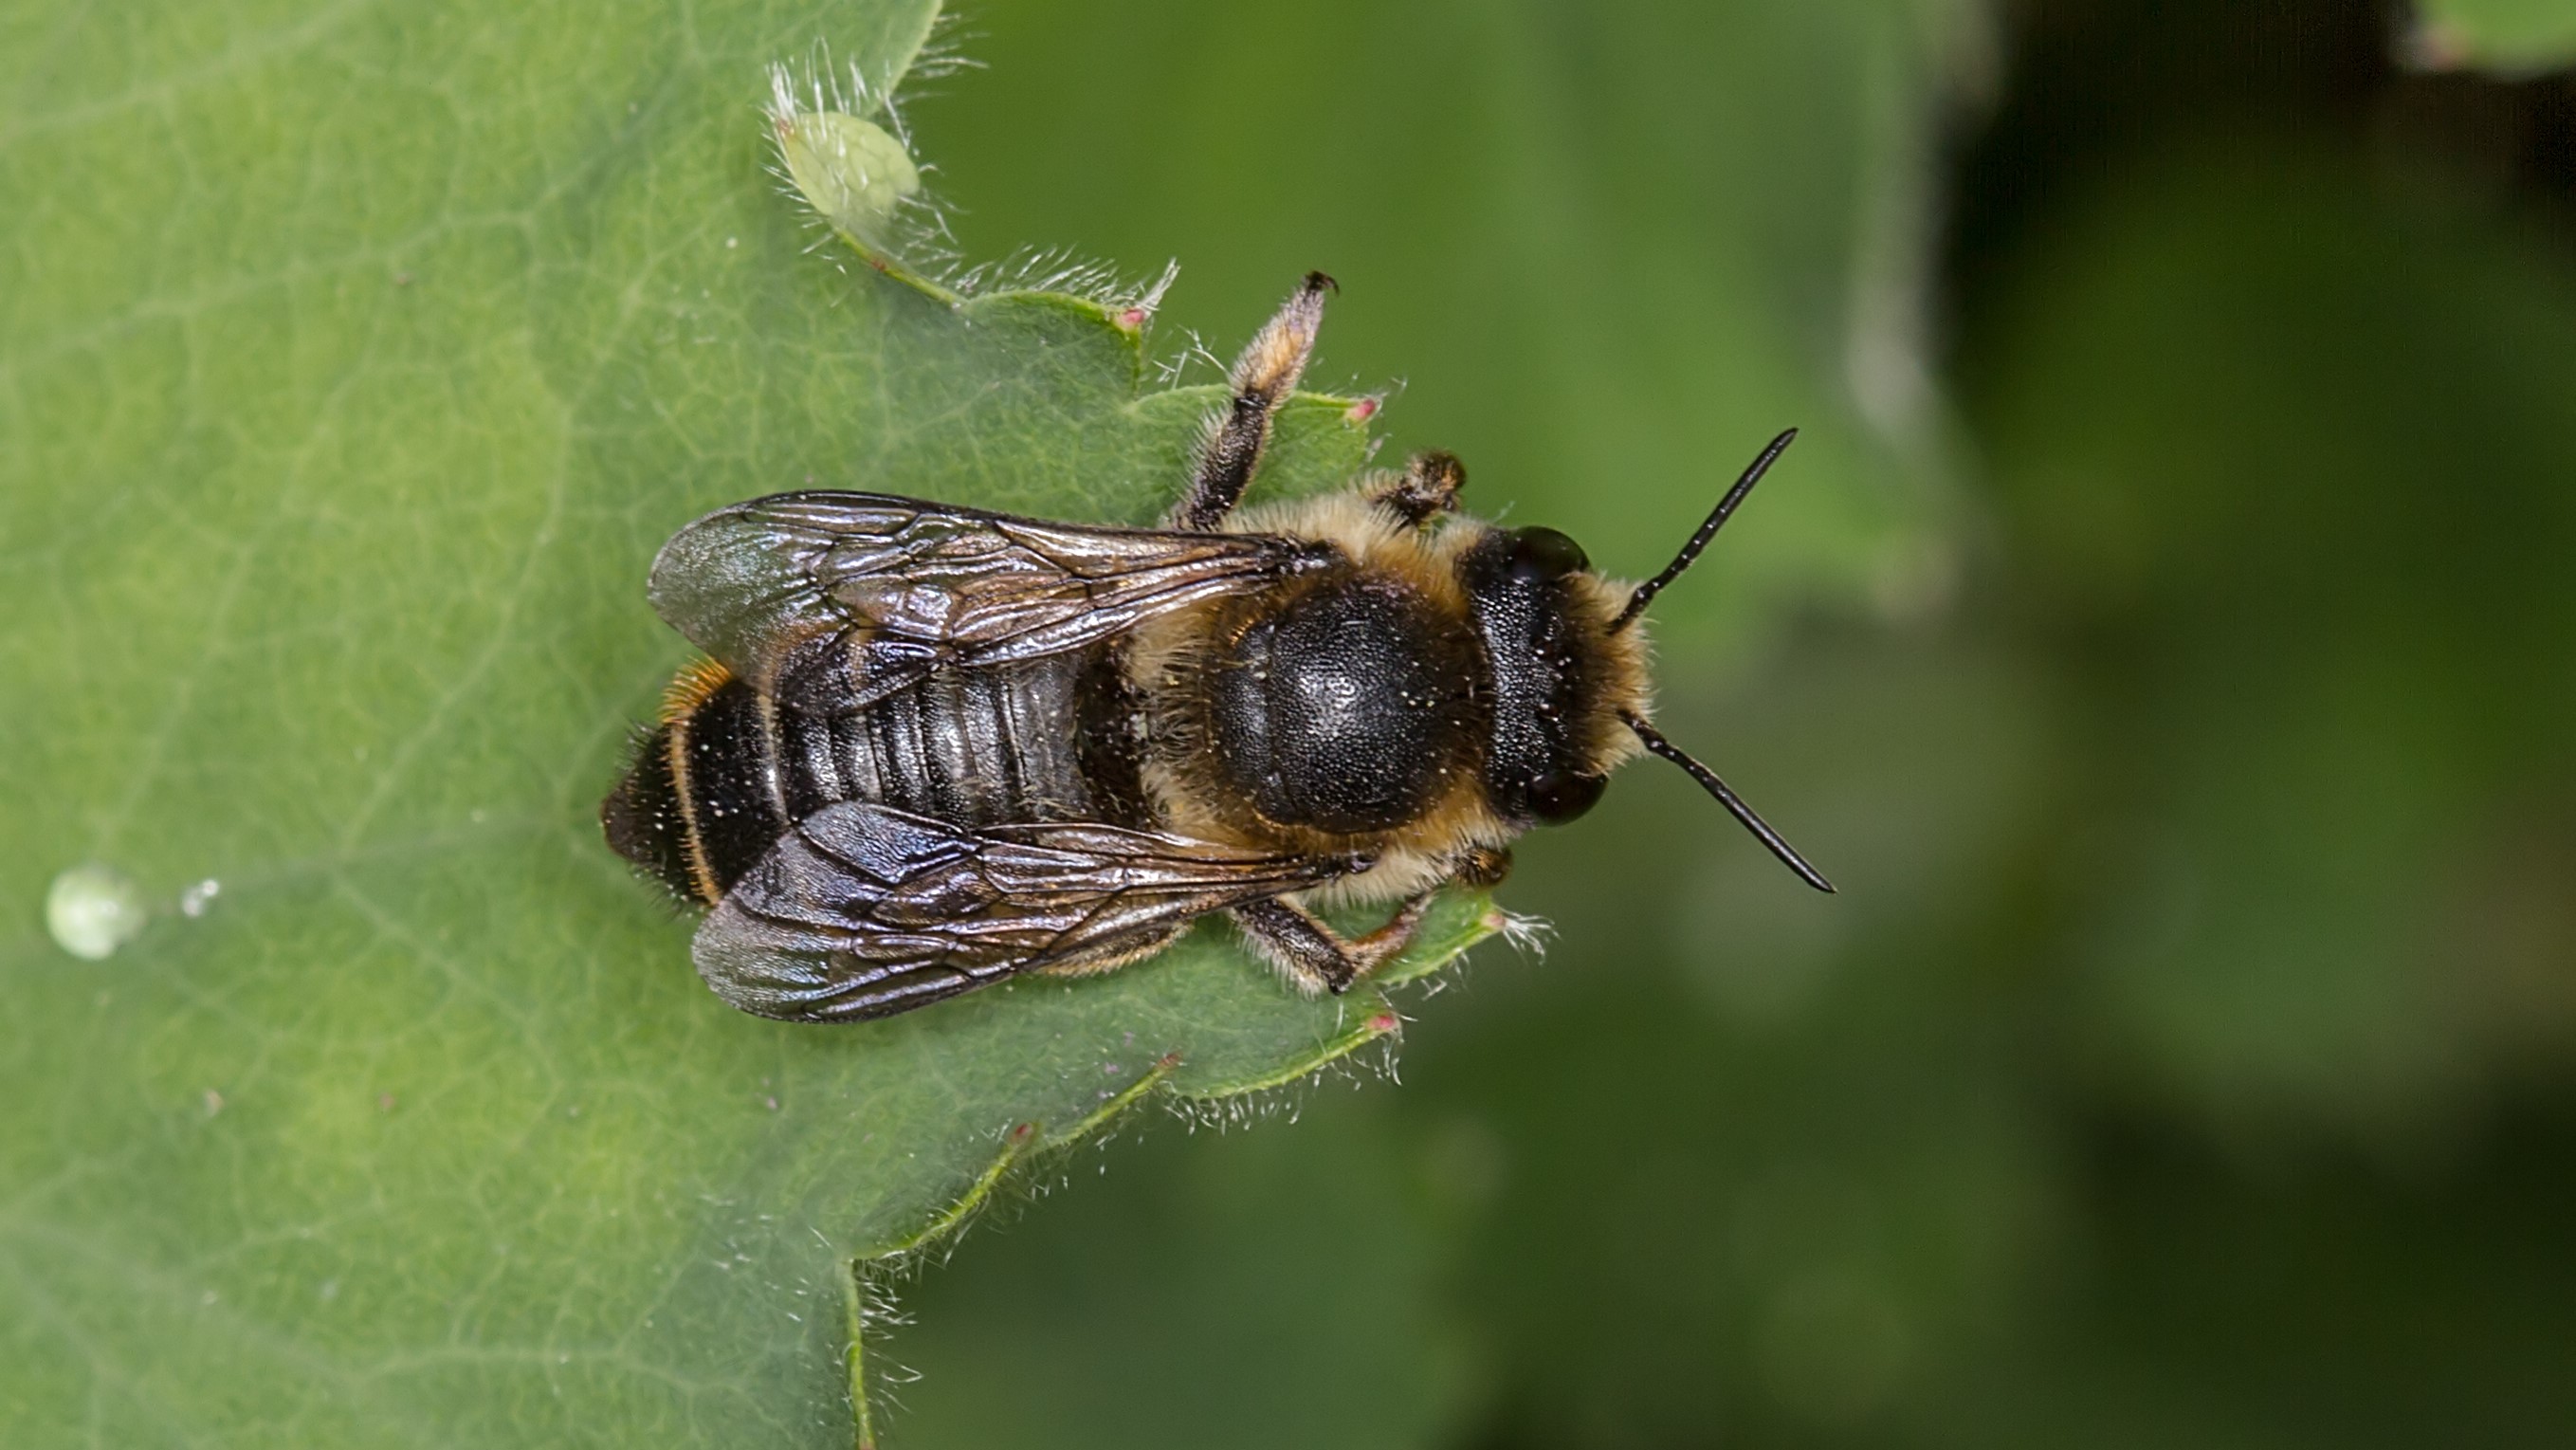 Attract Bees - Attract Mason Bees - Patchwork Leafcutter Bee